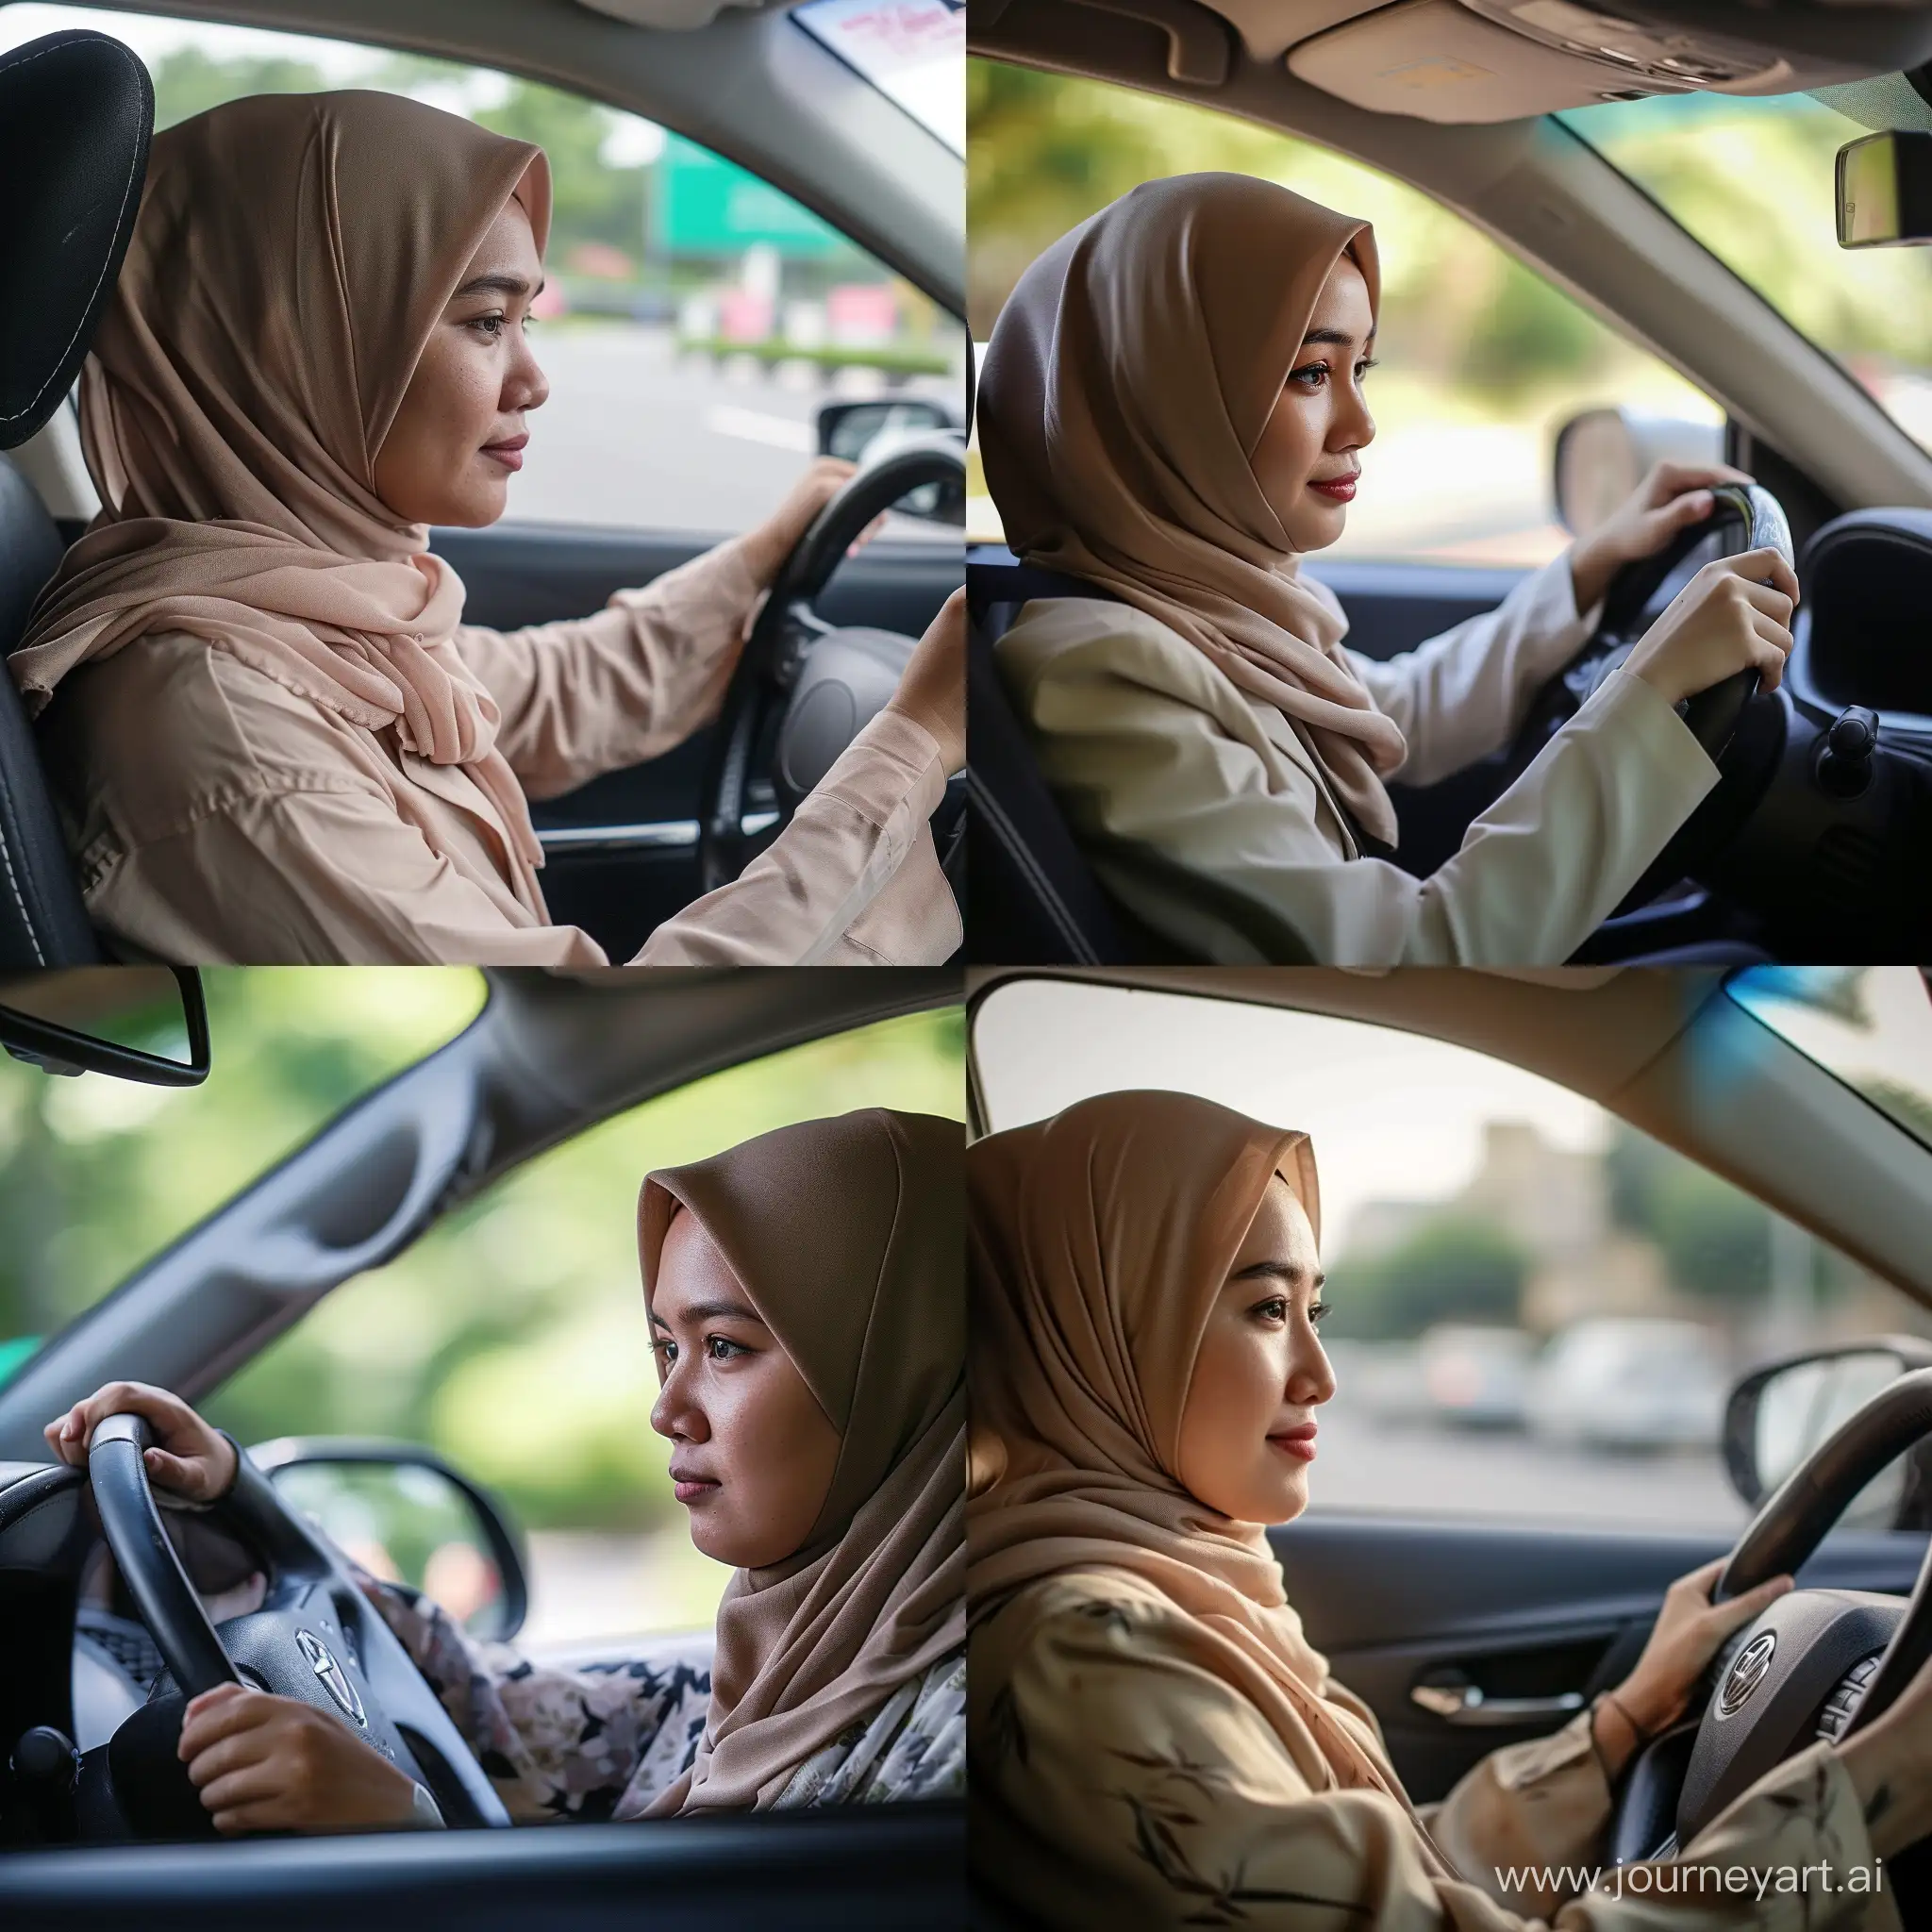 Indonesian woman wearing a hijab, is driving a car